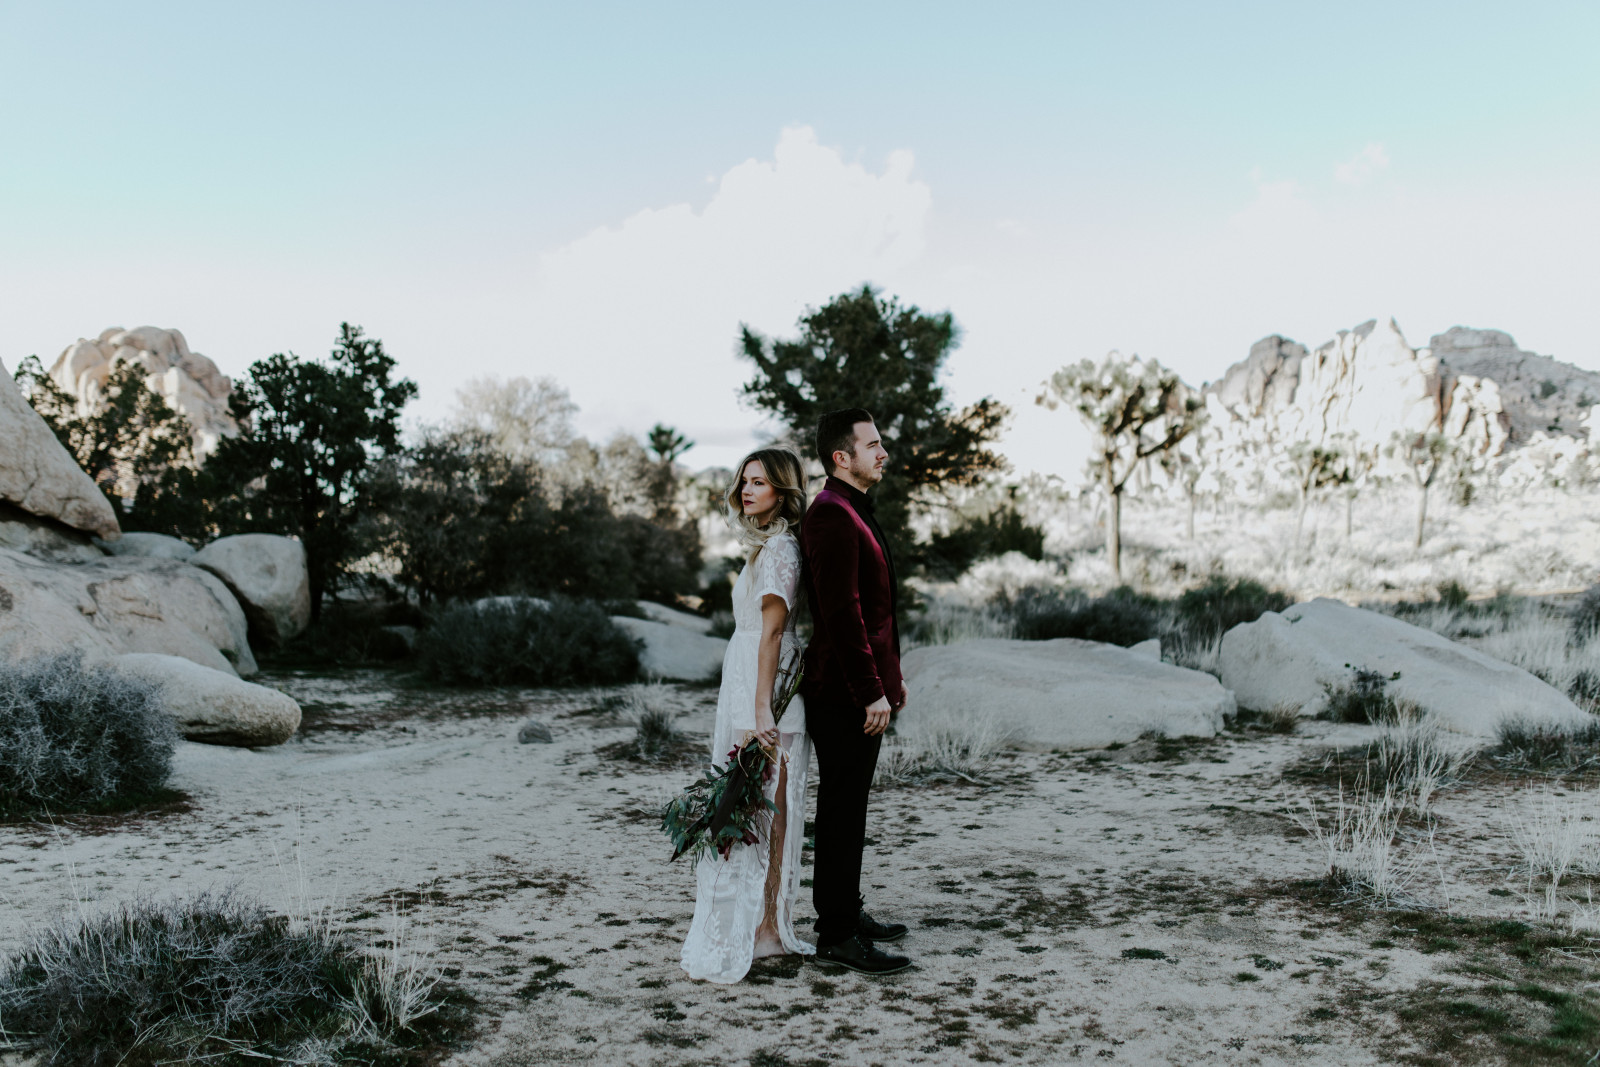 Alyssa and Jeremy stand back to back at Joshua Tree National Park. Elopement wedding photography at Joshua Tree National Park by Sienna Plus Josh.